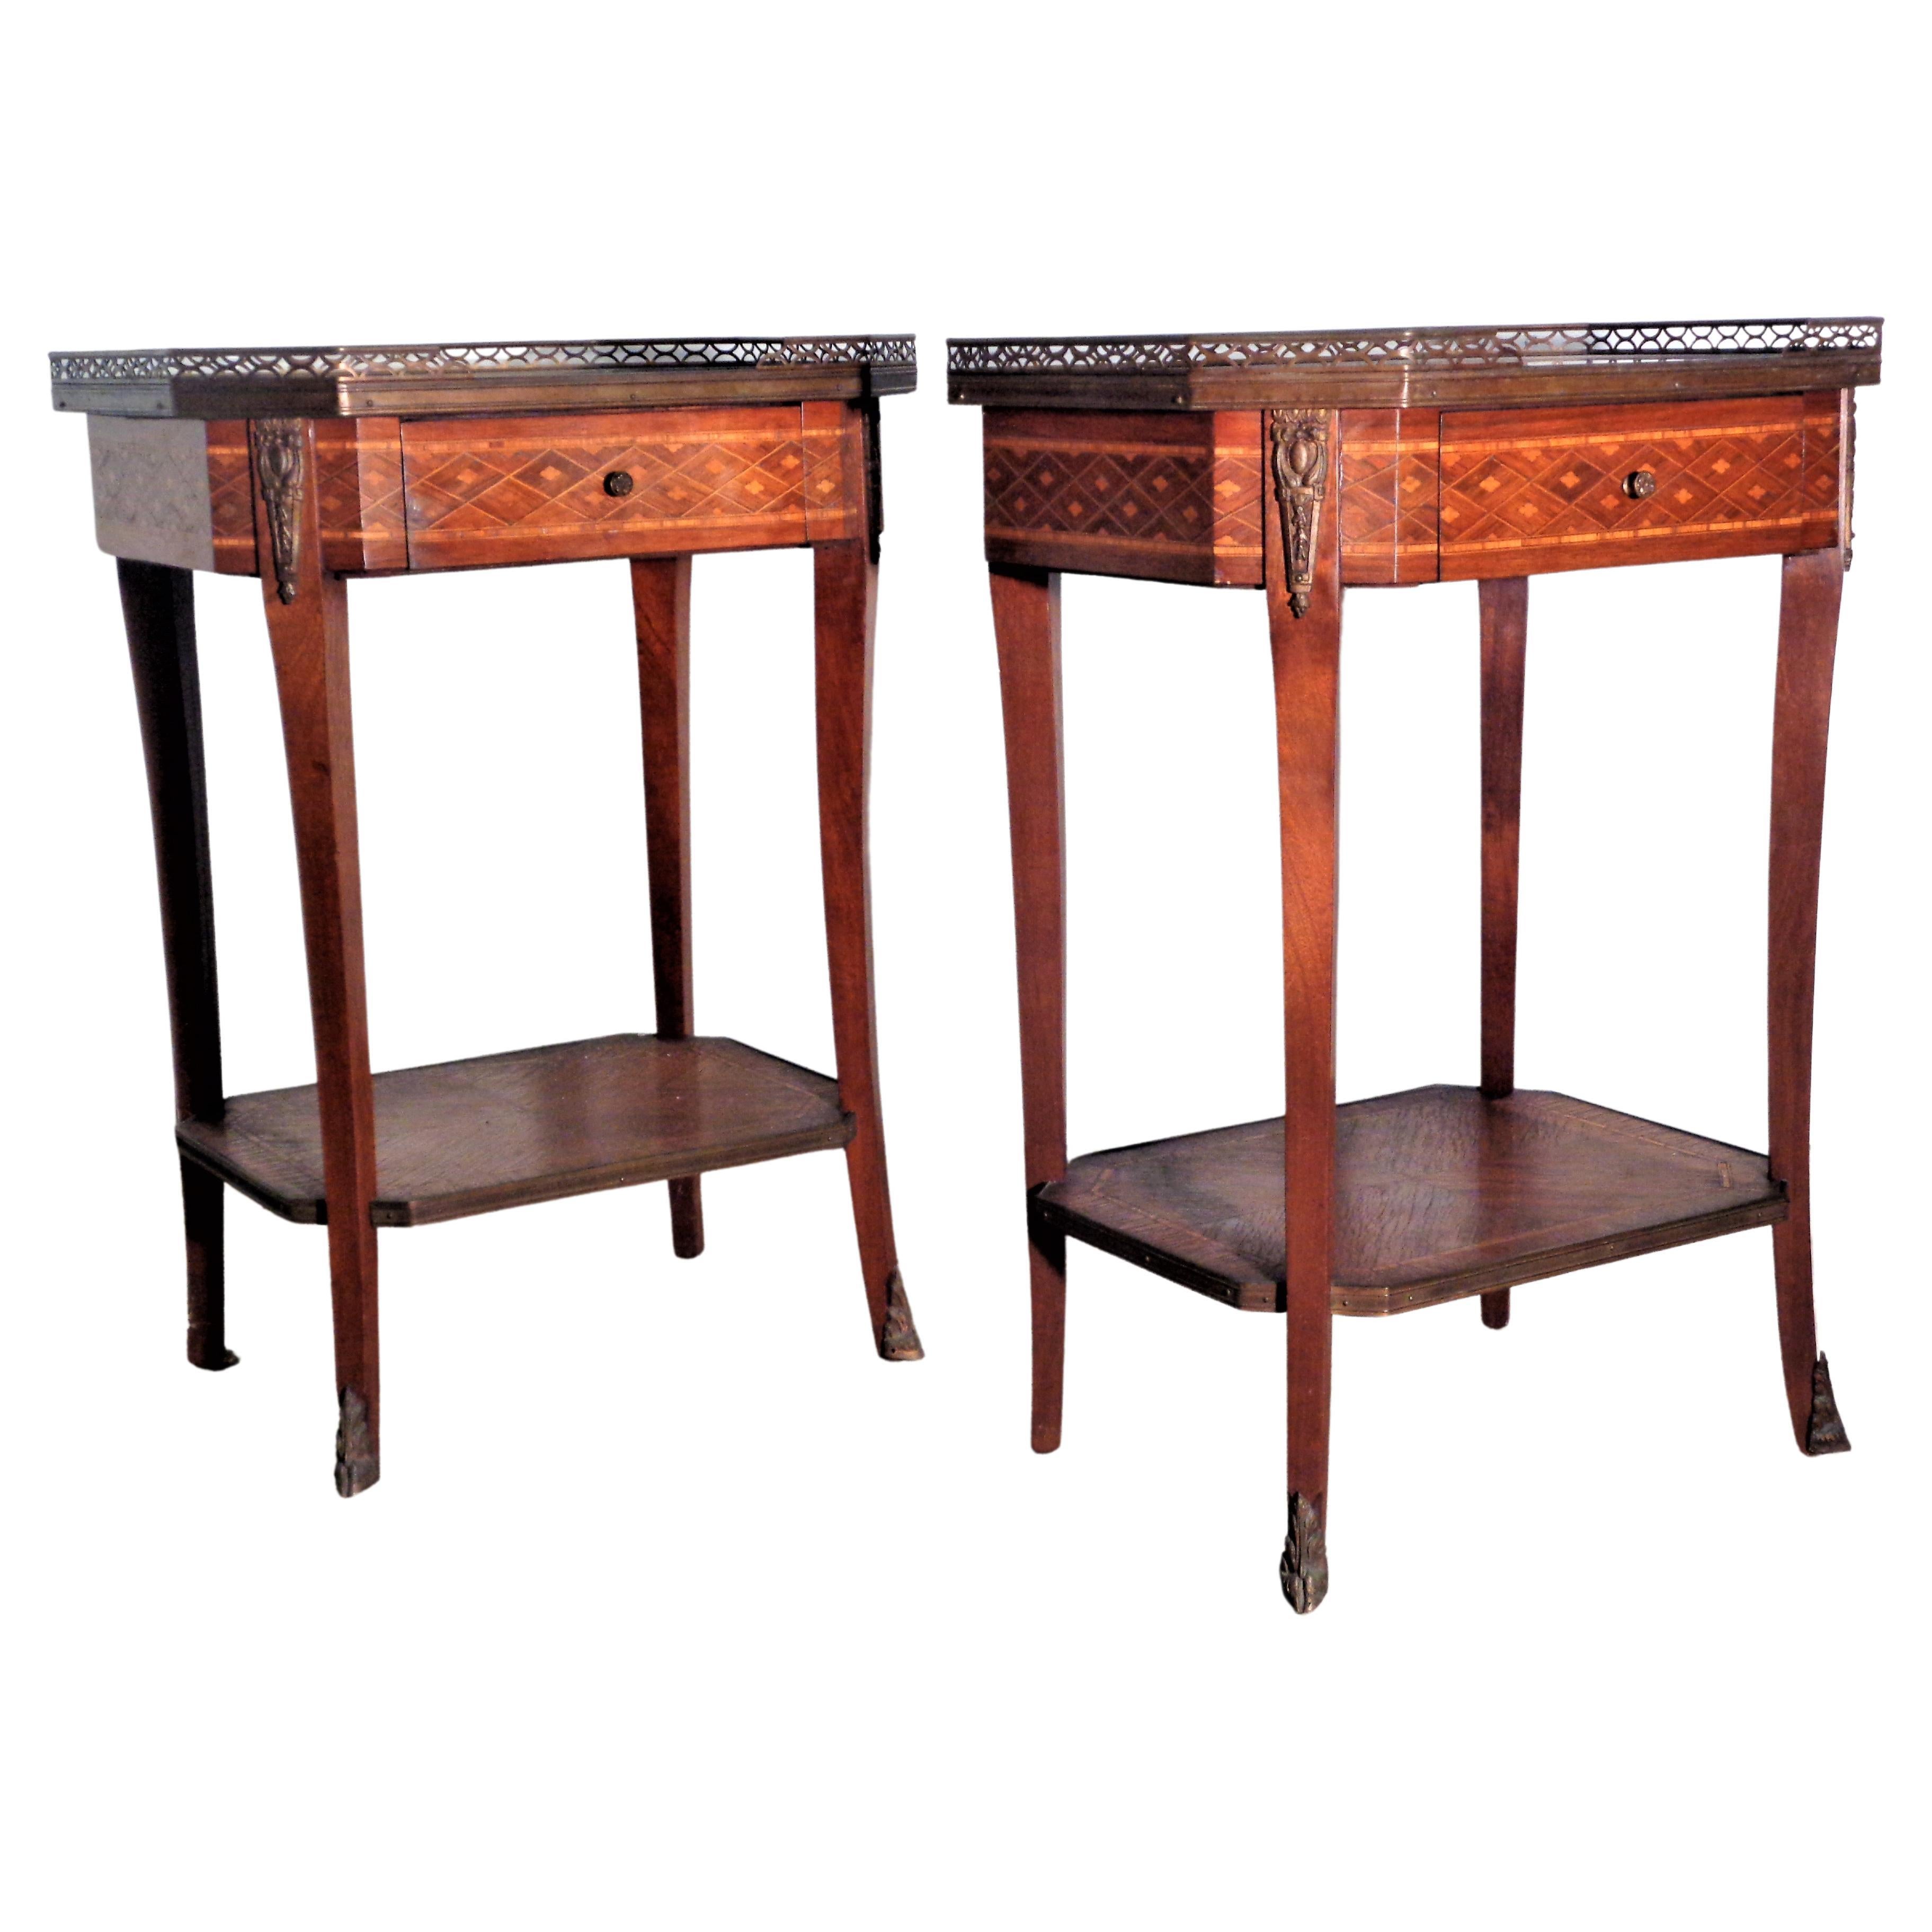 Pair of Grosfeld House parquetry inlaid Louis XVI style bouillotte tables with rouge marble tops / brass galleries at top and bottom shelf / bronze mounts at sides / bottom of feet / dovetailed drawers. Grosfeld's - Chicago, New York, Los Angeles